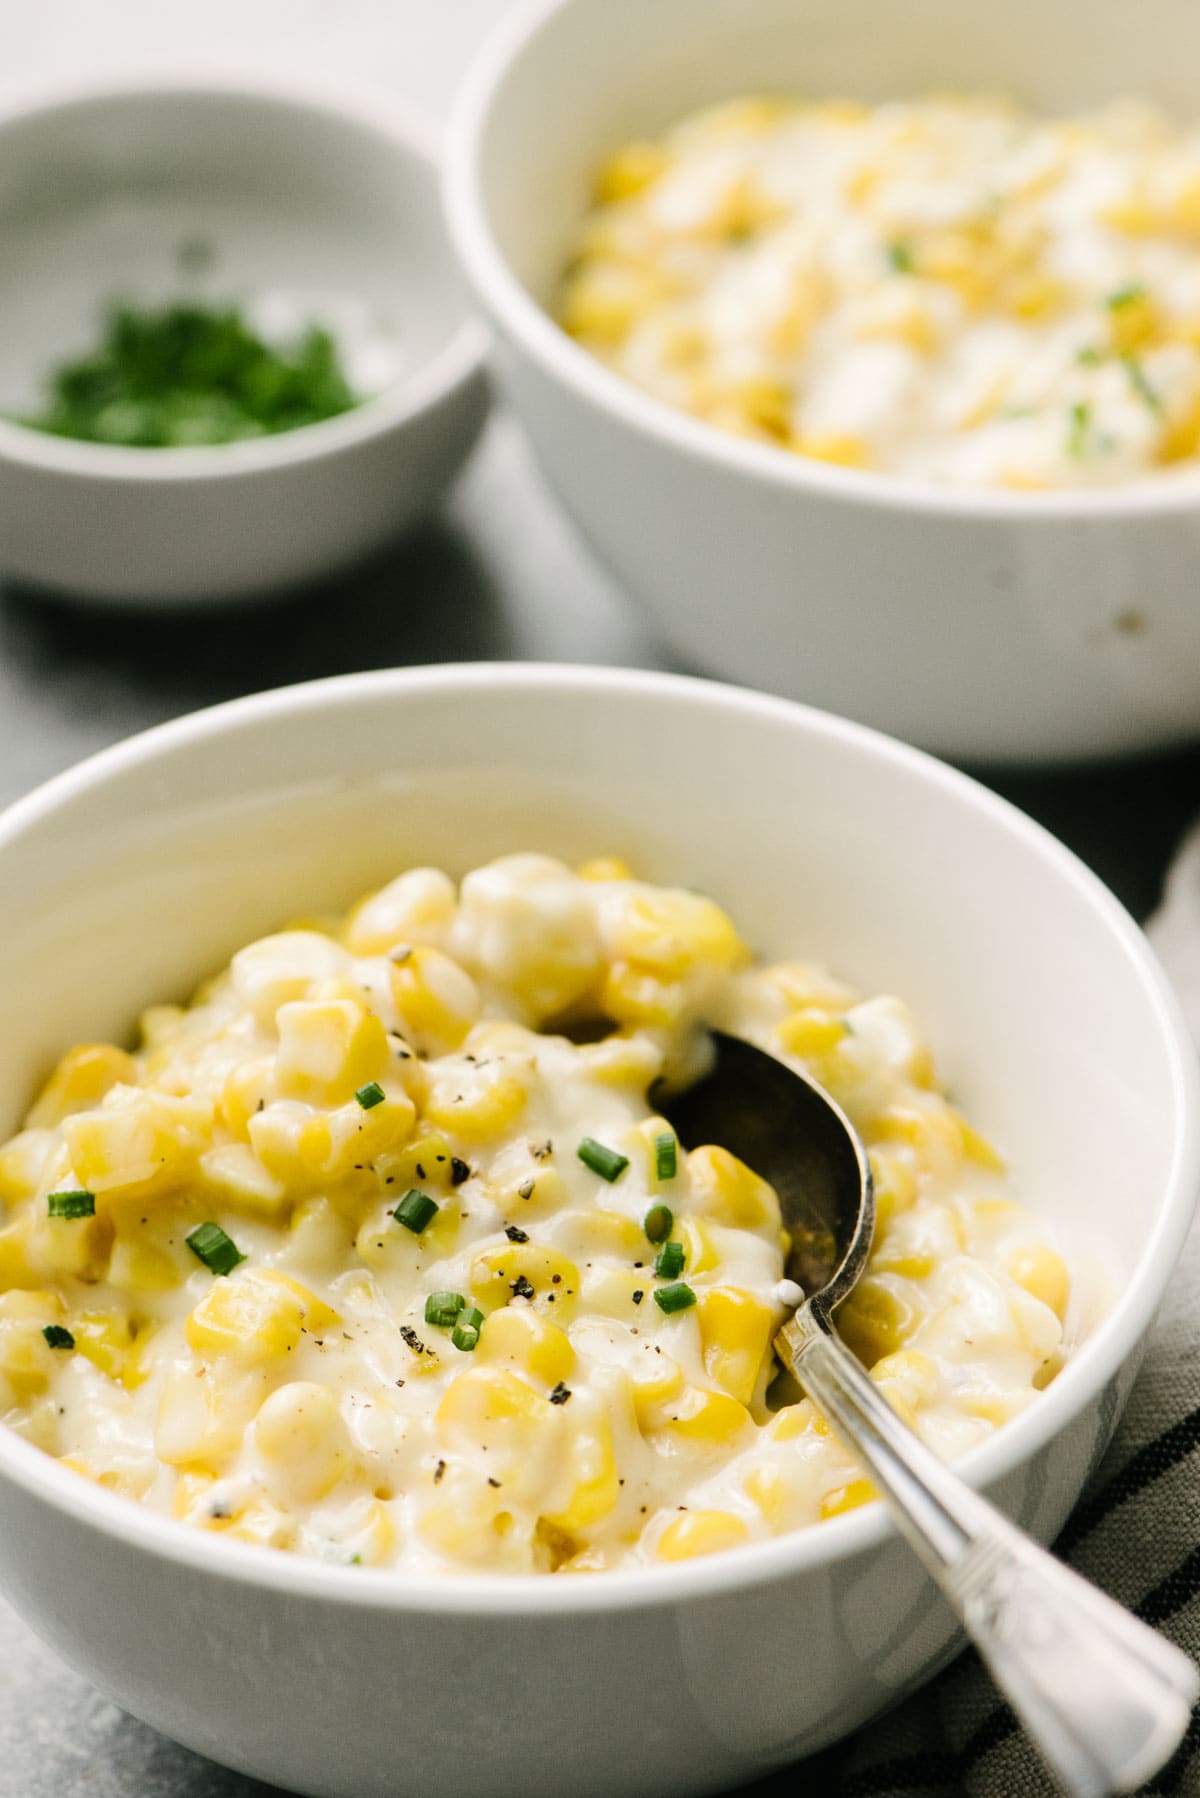 Side view, a spoon tucked into a small bowl of creamed corn, garnished with fresh chives. A separate bowl and a small pinch bowl of fresh chives are in the background.